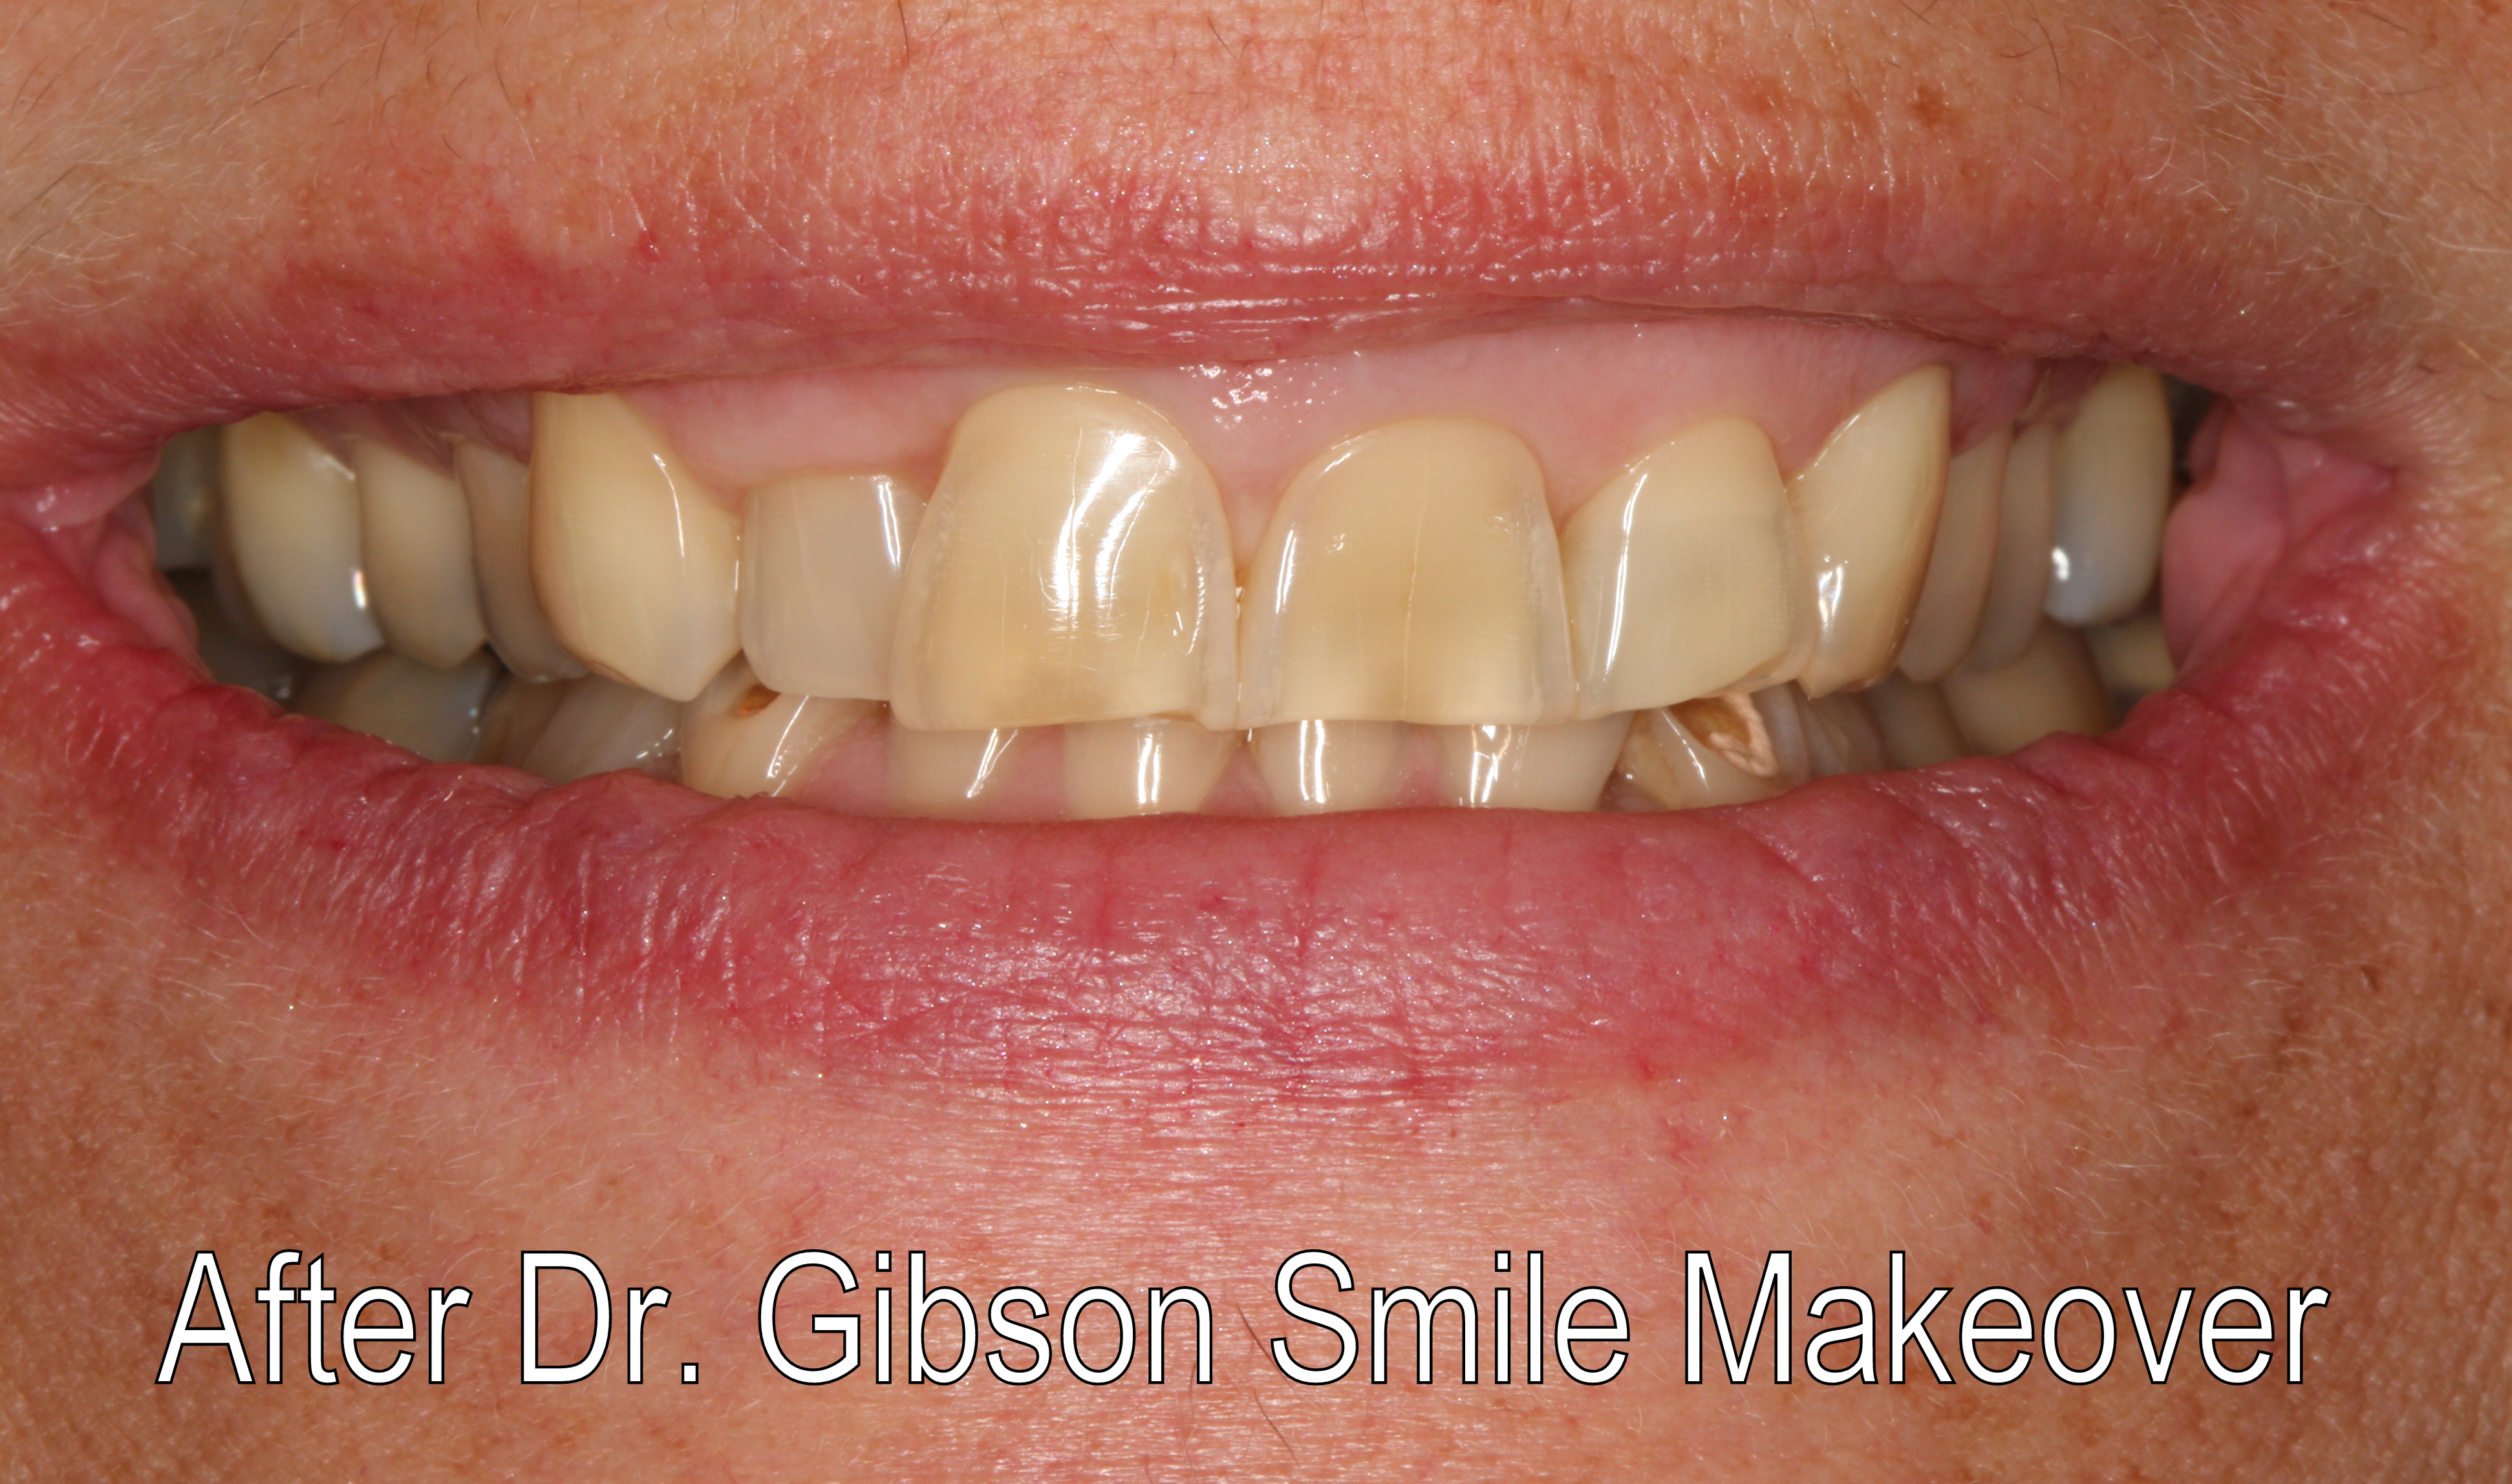 Smiles By Dr. Gibson Smile Makeover 2